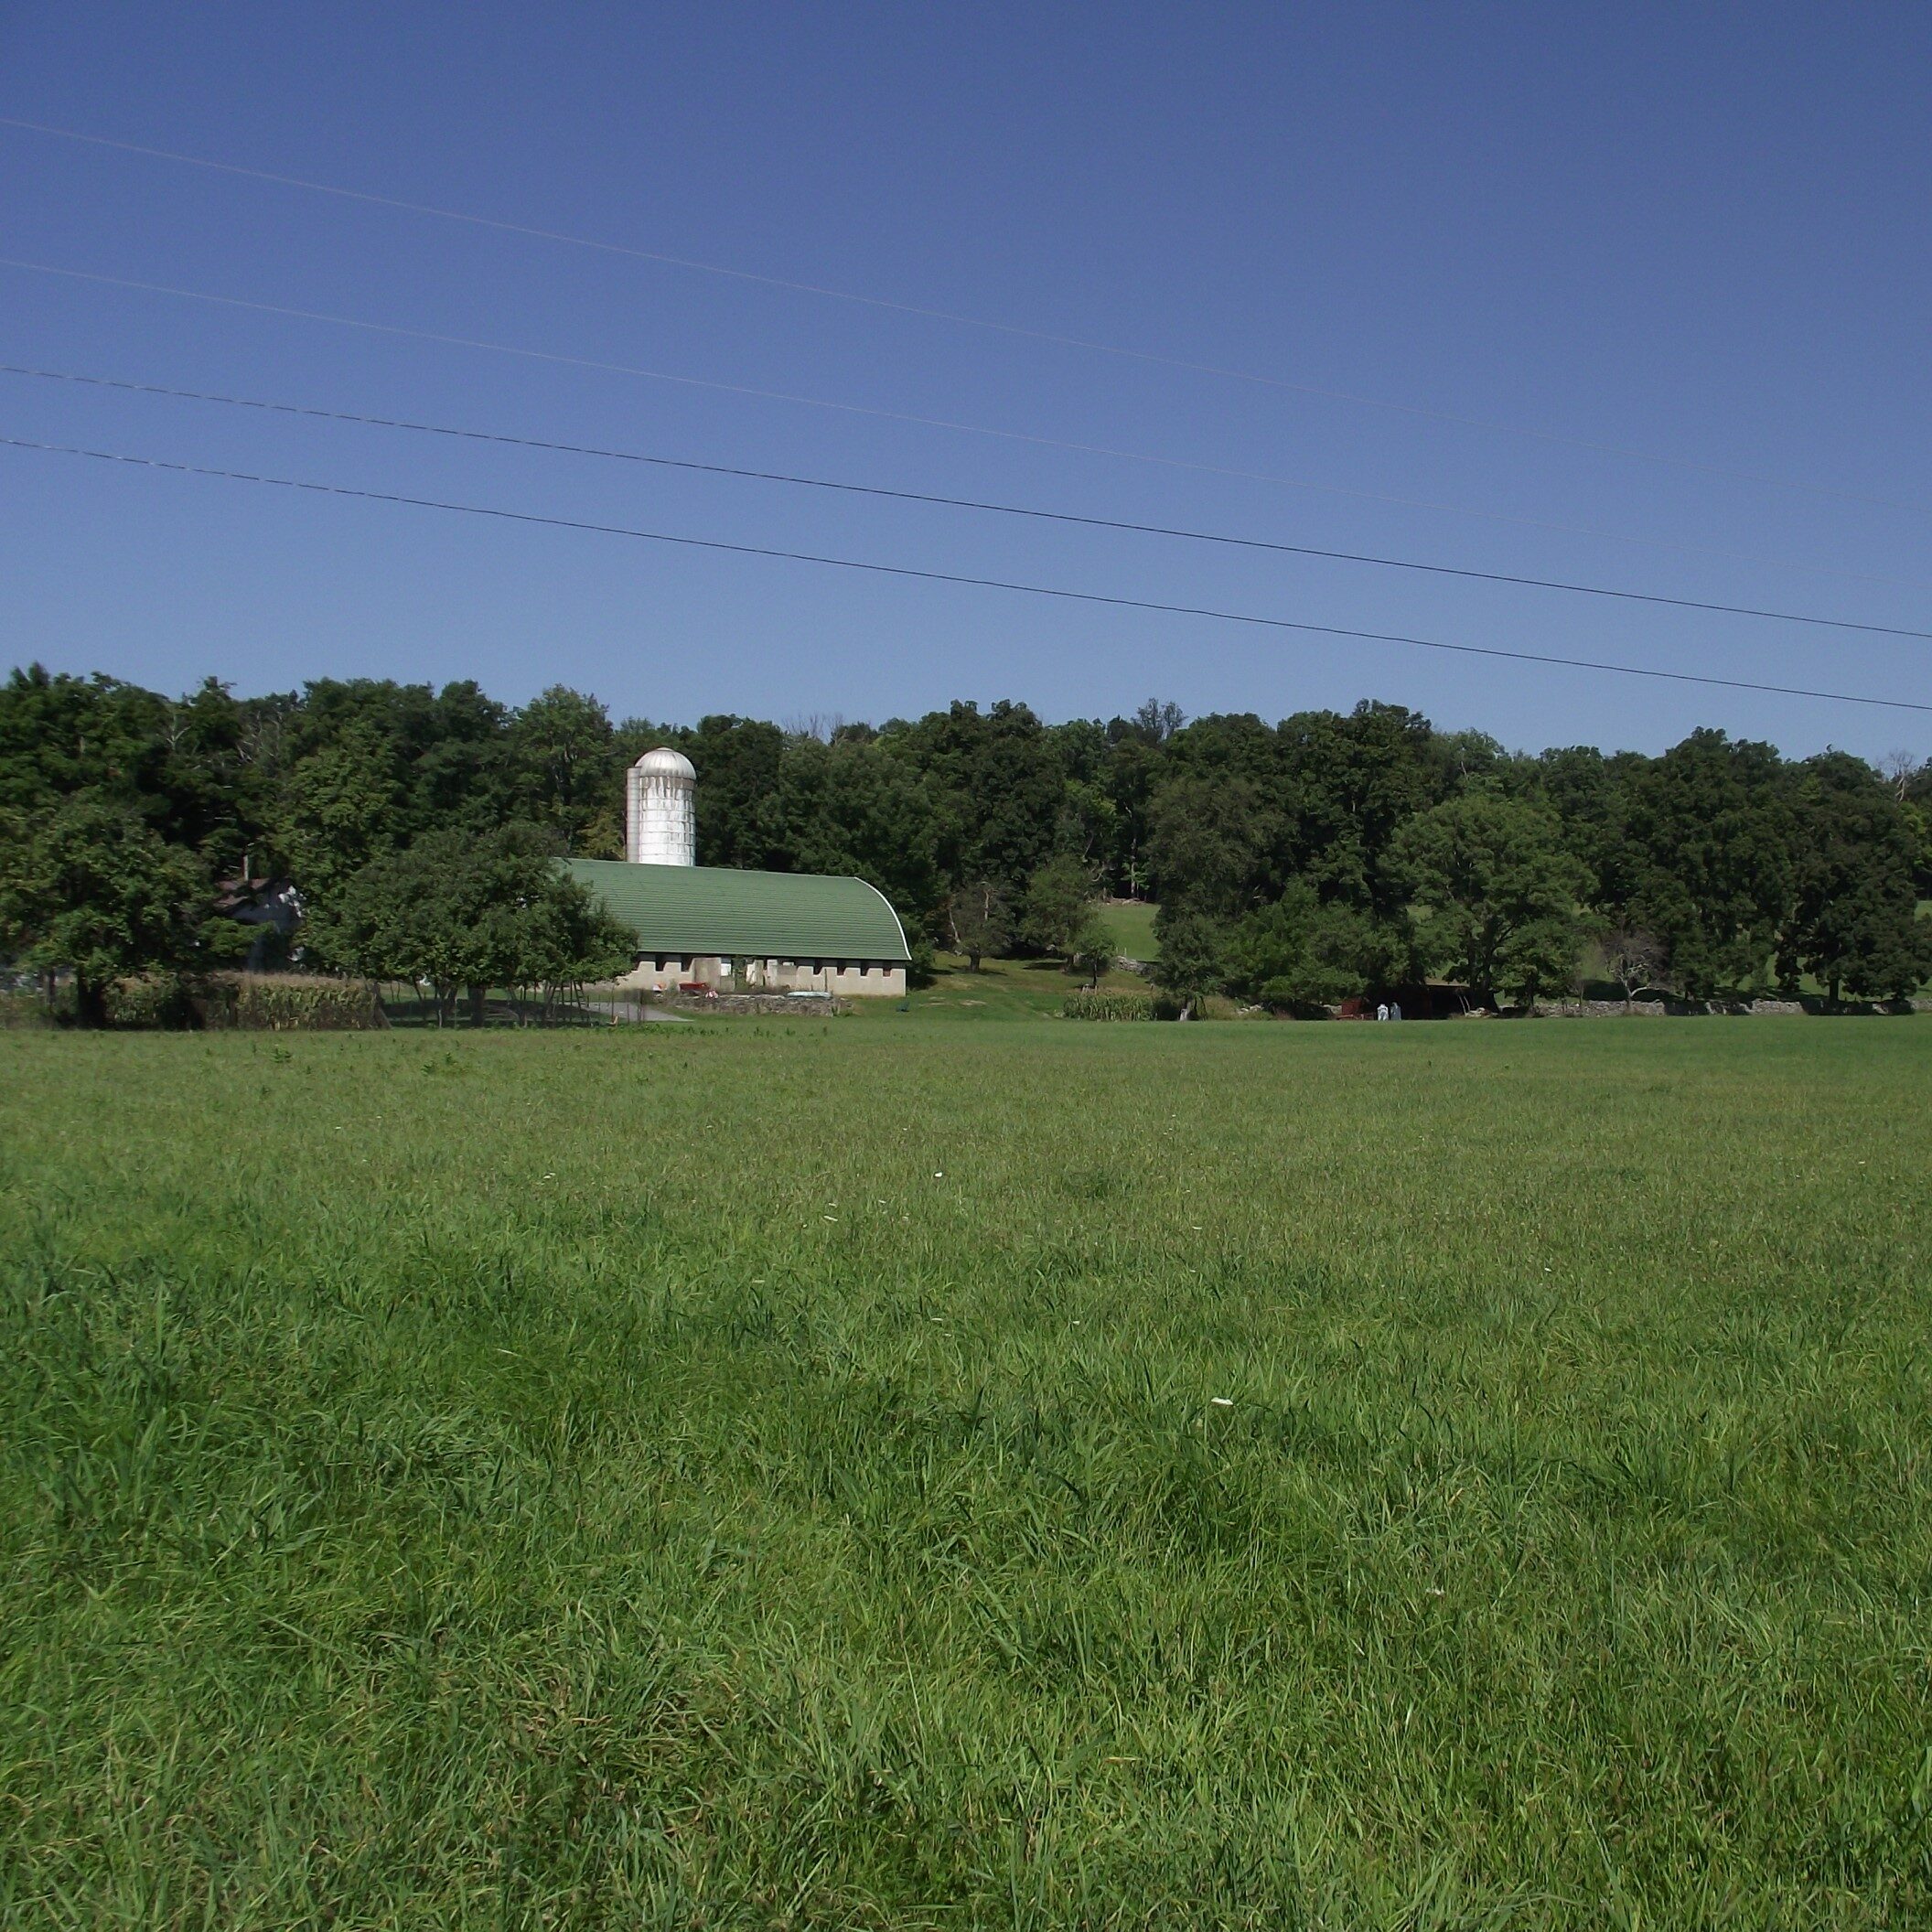 A field with a barn, silo, and trees in the distance